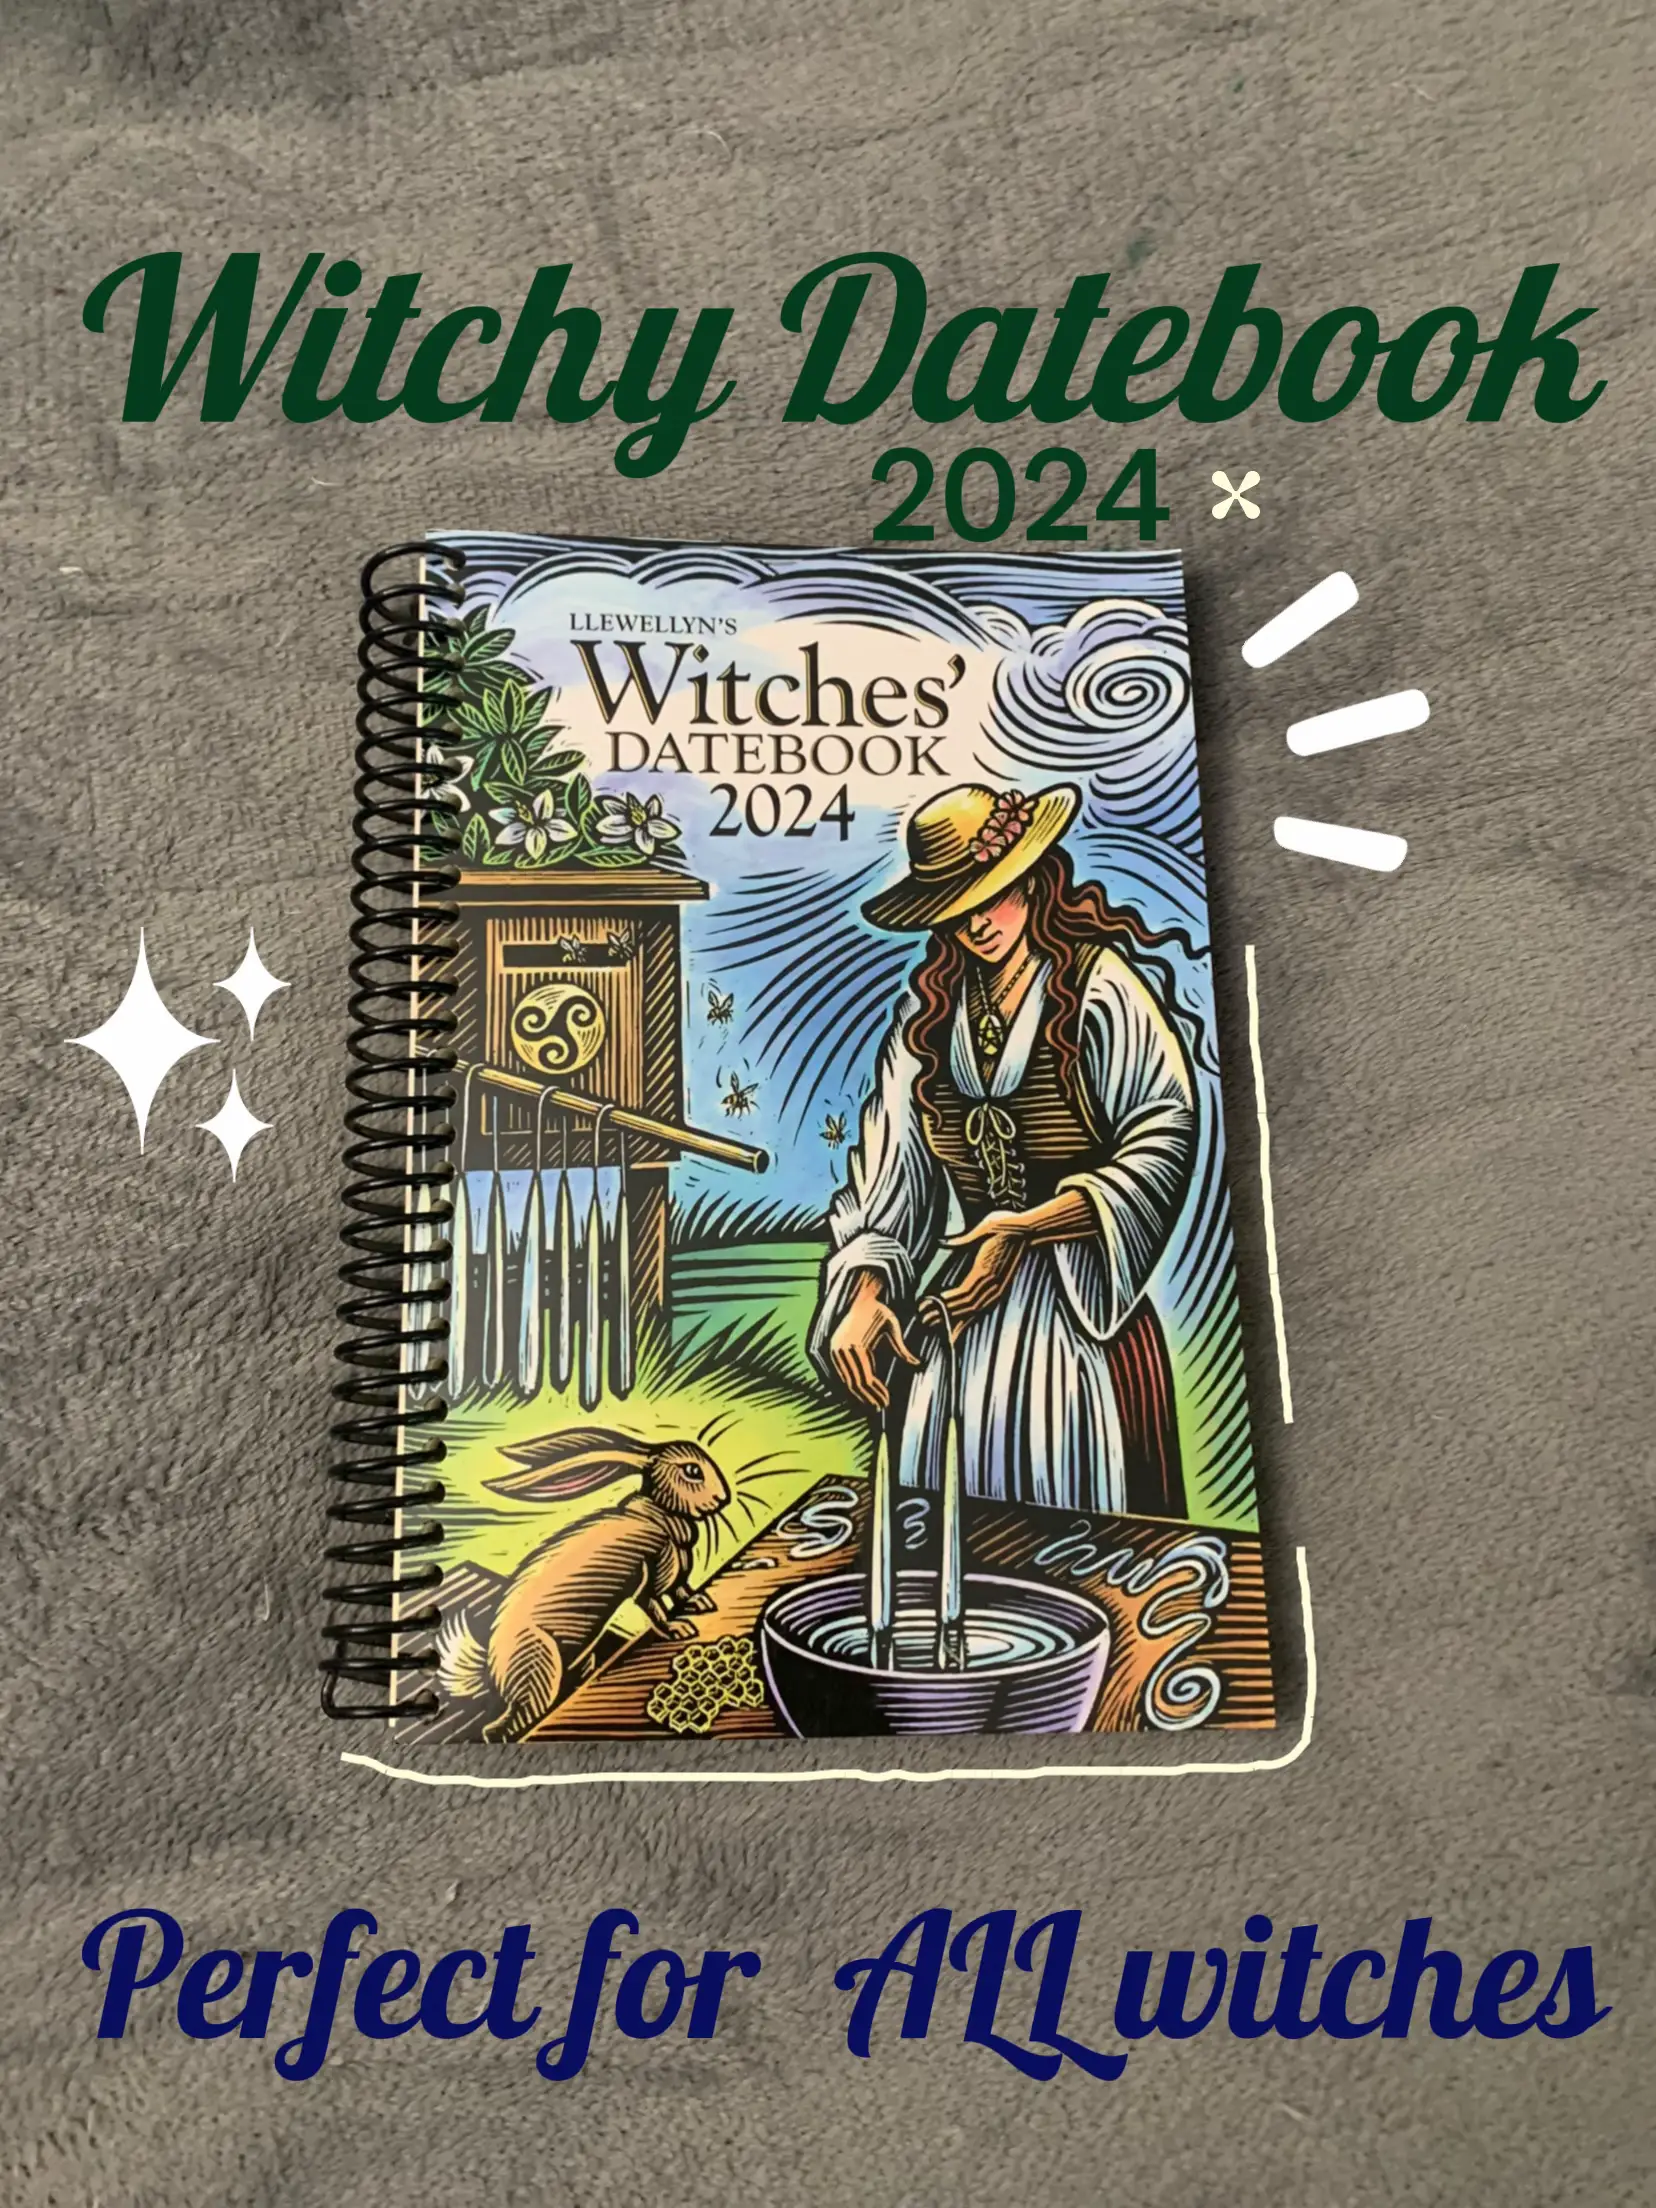 Witchy Datebook 2024 (yule gift) Gallery posted by Jol Lemon8